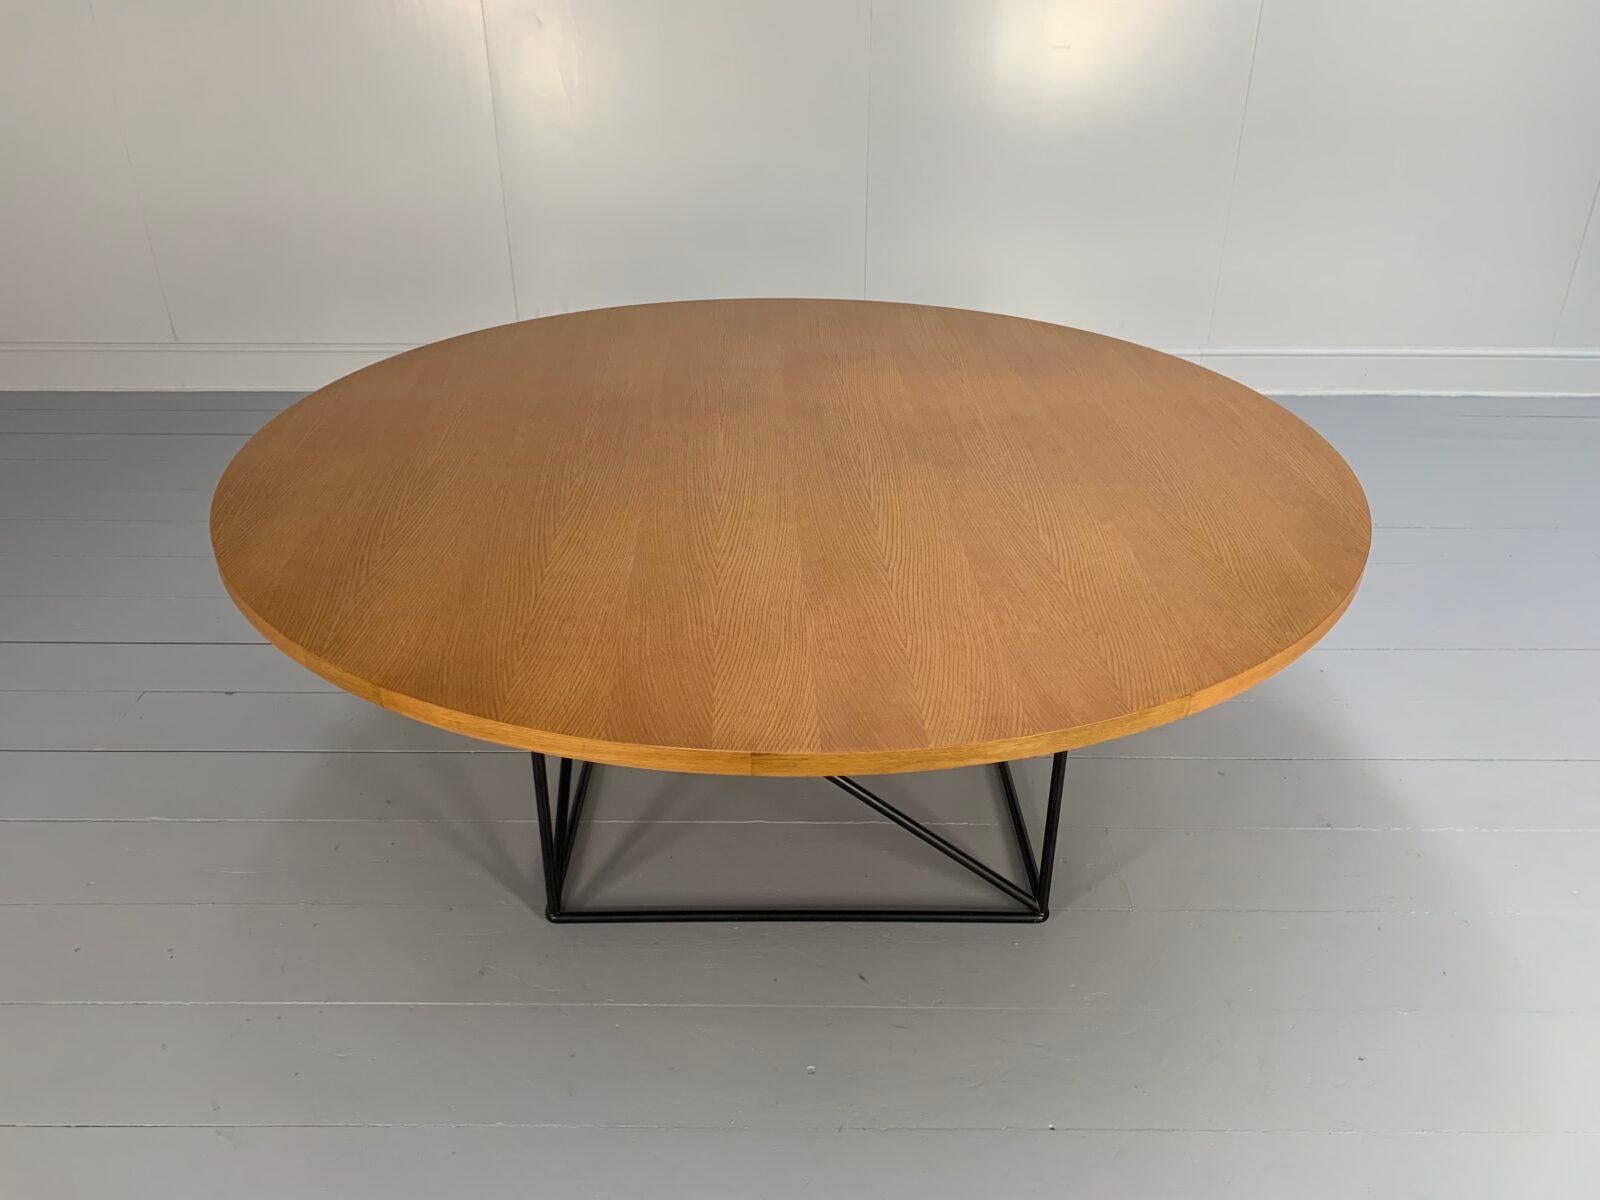 Contemporary Cassina Le Corbusier “LC15” Round Circular Dining Table – In Natural Oak